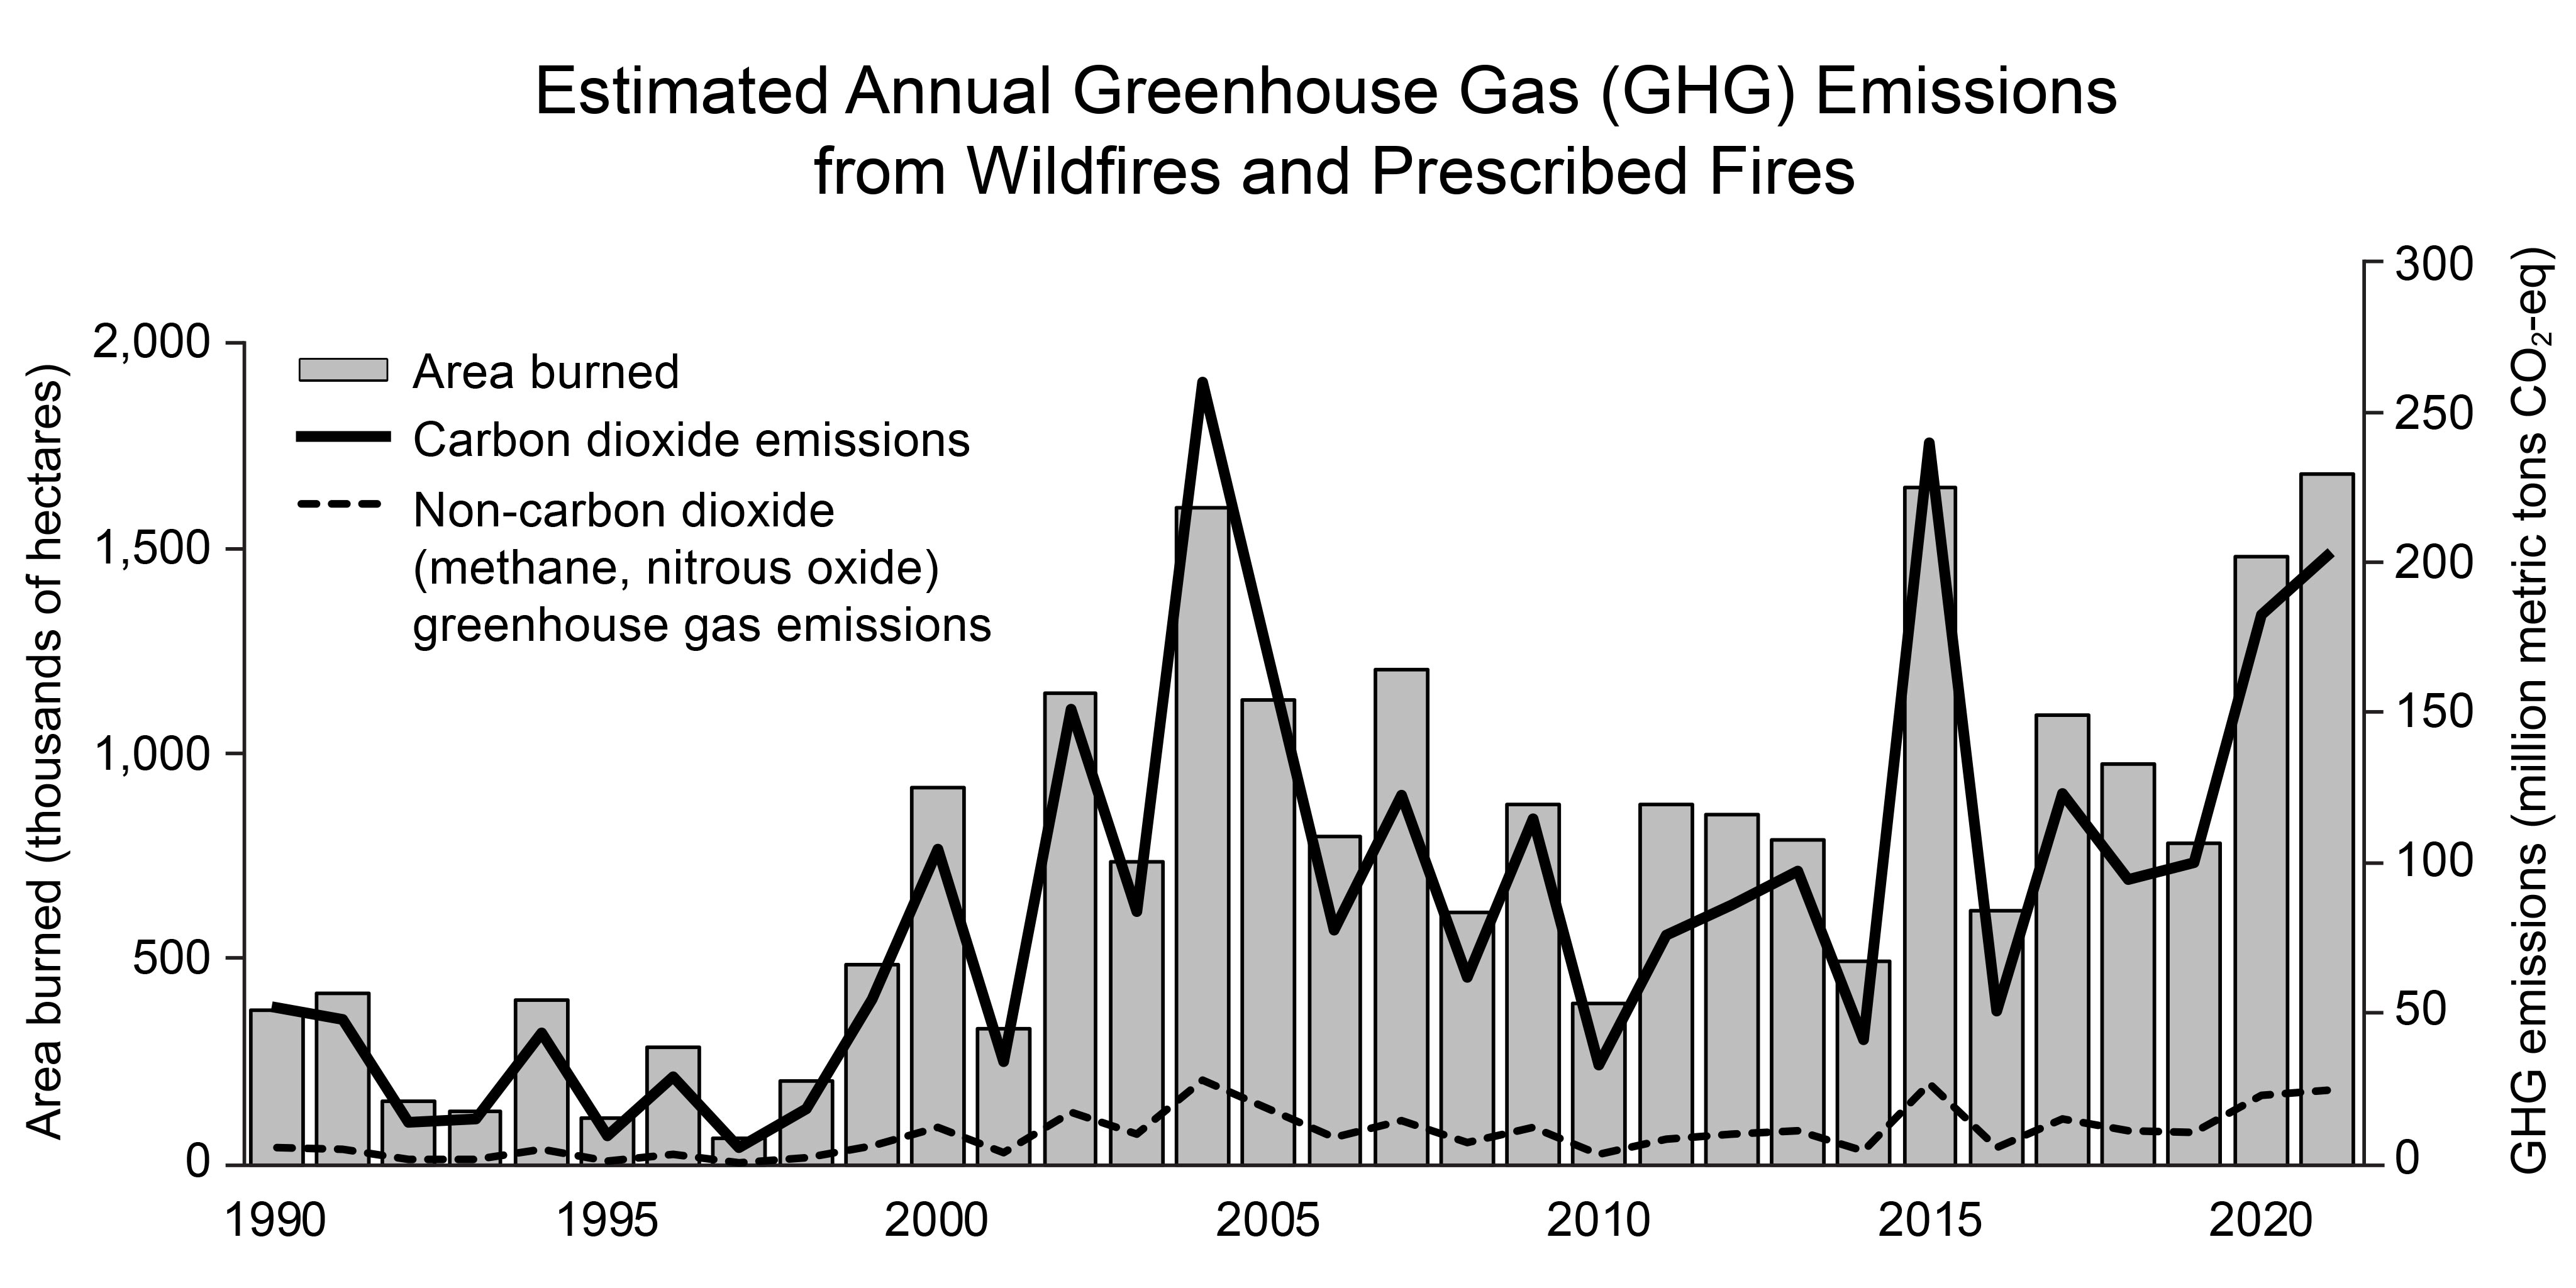 Estimated Annual Greenhouse Gas (GHG) Emissions from Wildfires and Prescribed Fires